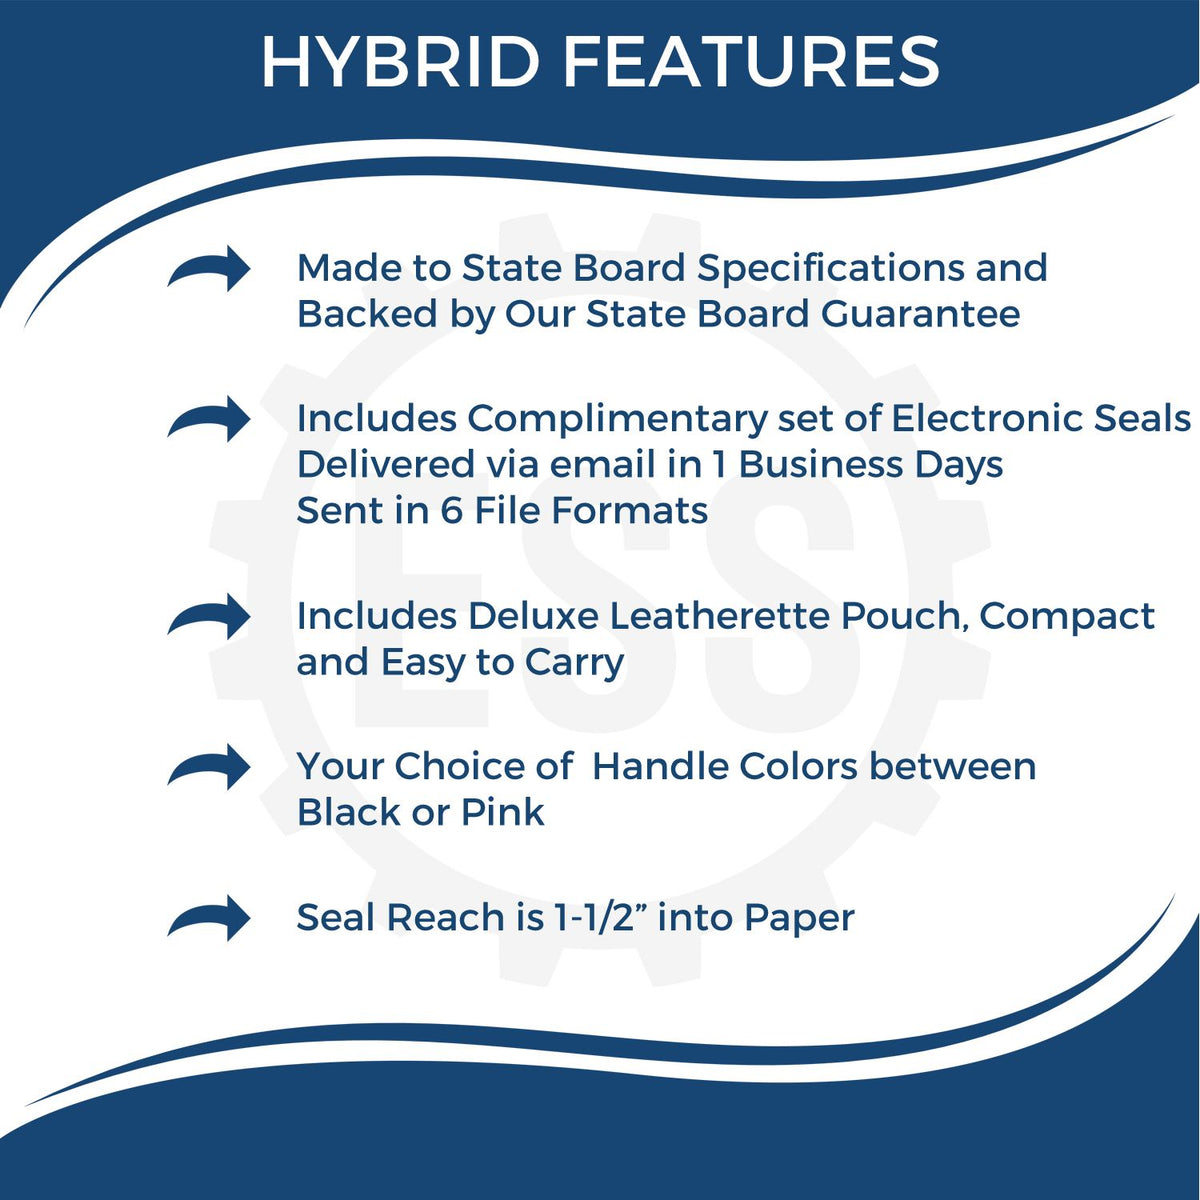 A picture of an infographic highlighting the selling points for the Hybrid Washington Landscape Architect Seal